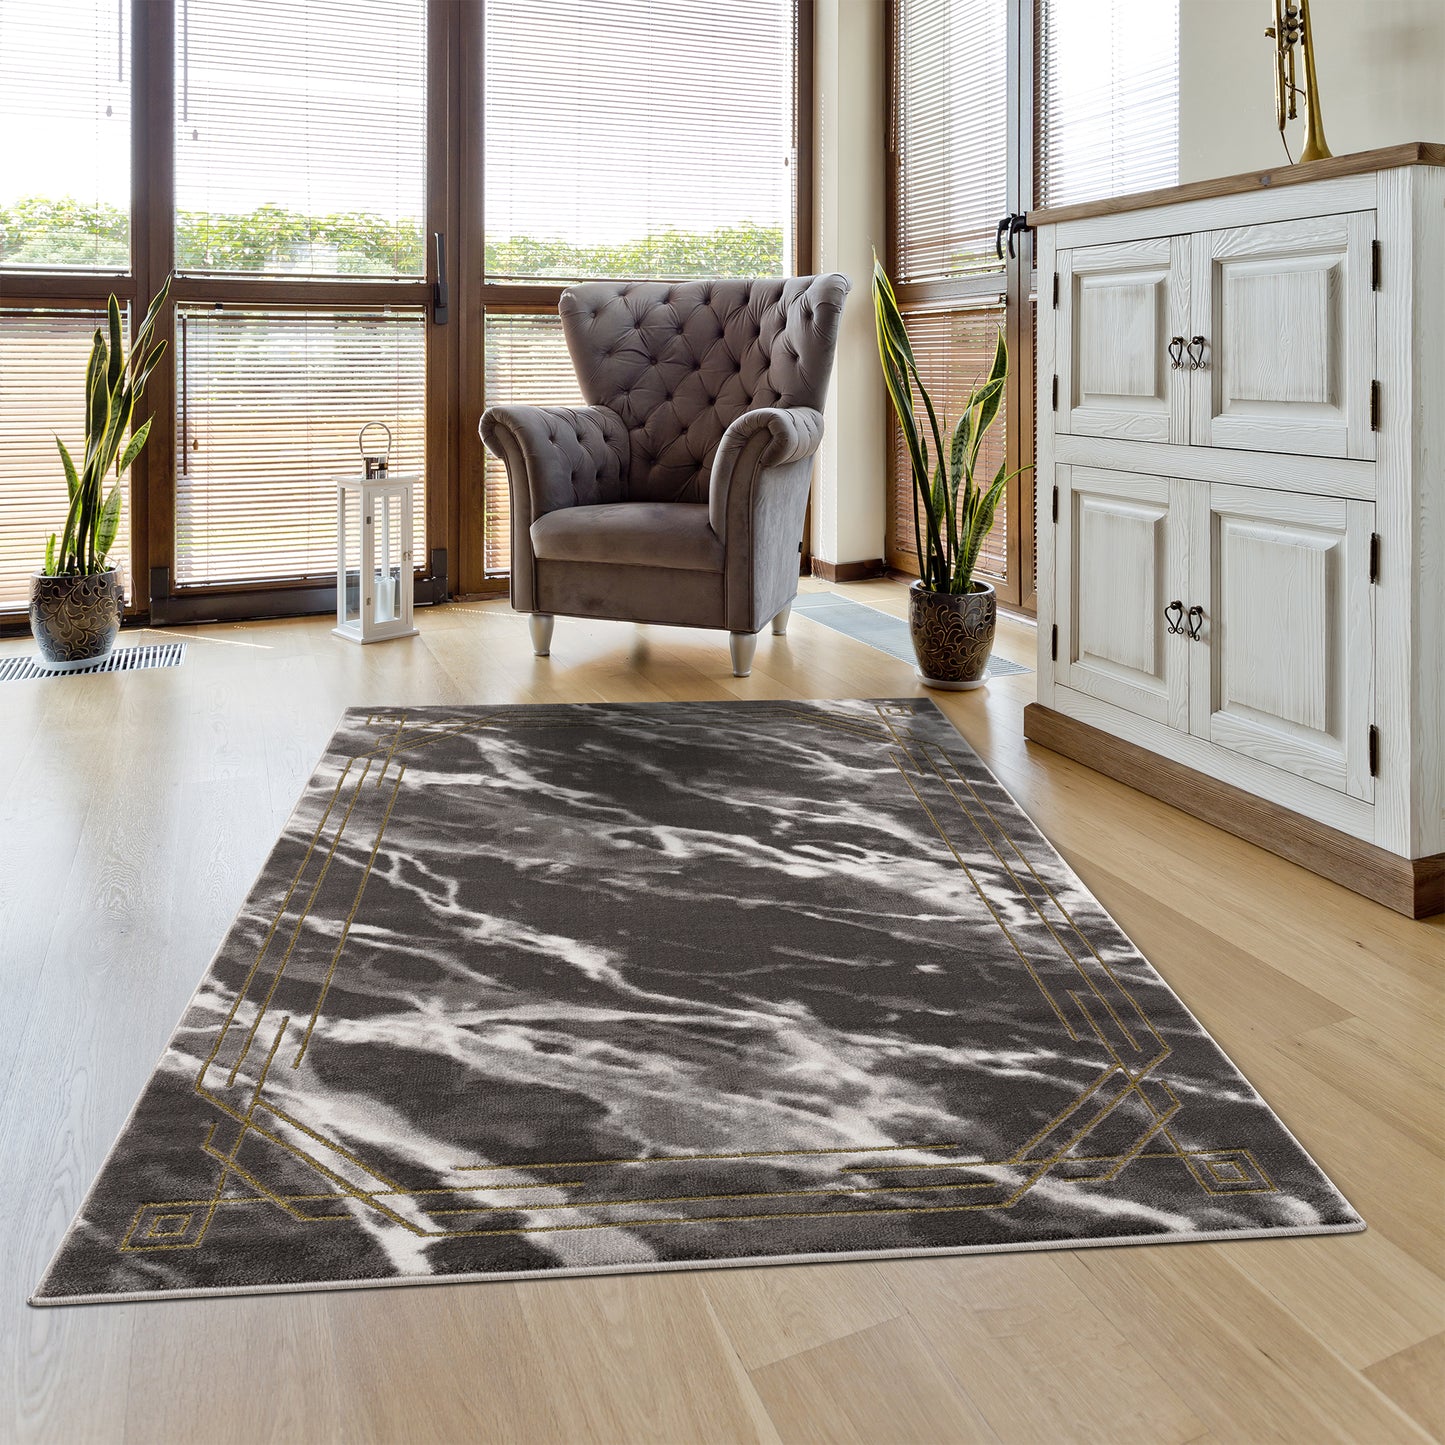 La Dole Rugs Modern Minimalistic Marble Pattern Abstract Rustic Grey Charcoal Gold Bordered Area Rug